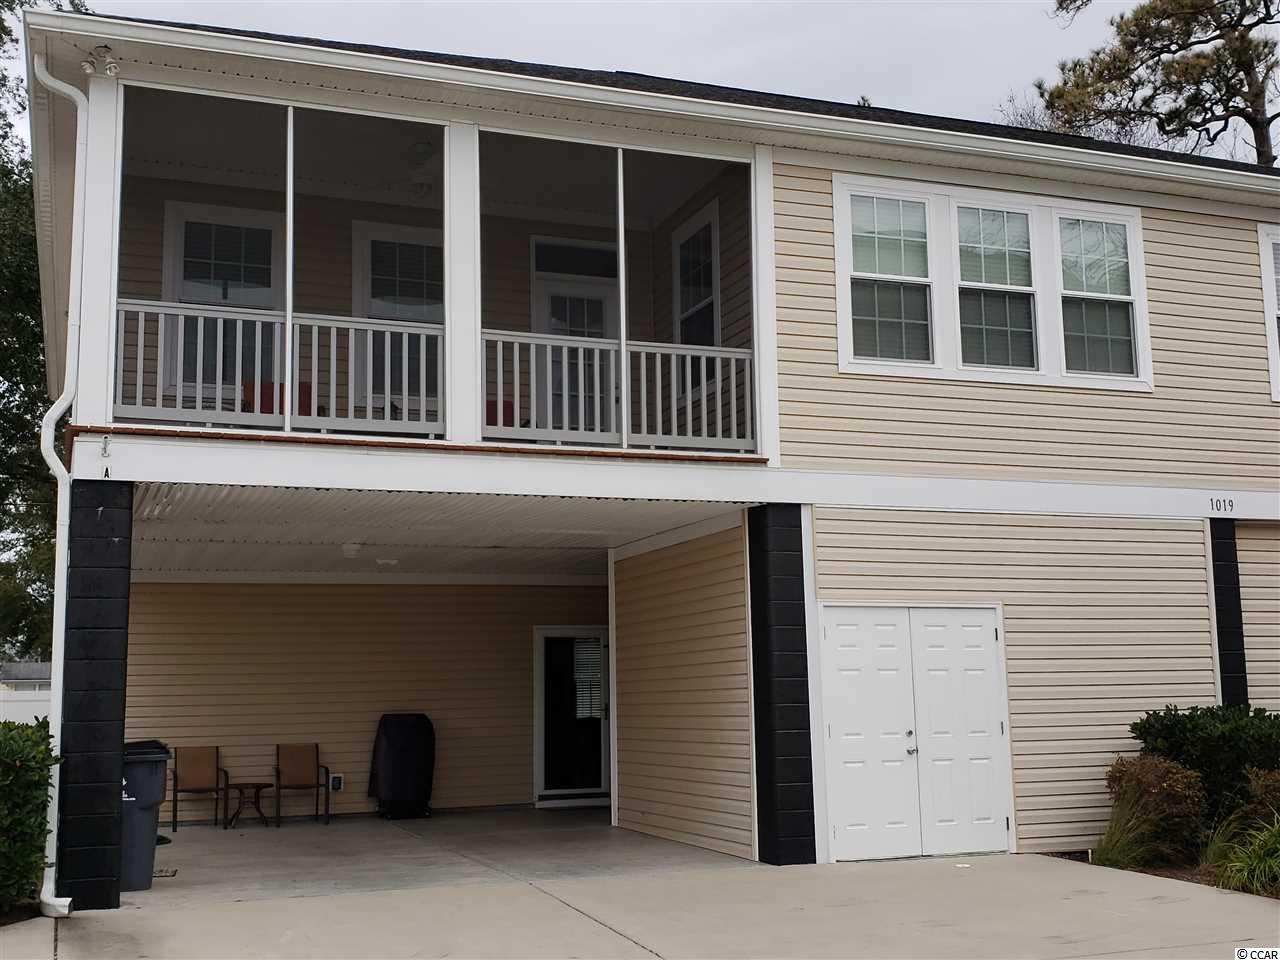 1019-A Kelly Ct. Murrells Inlet, SC 29576